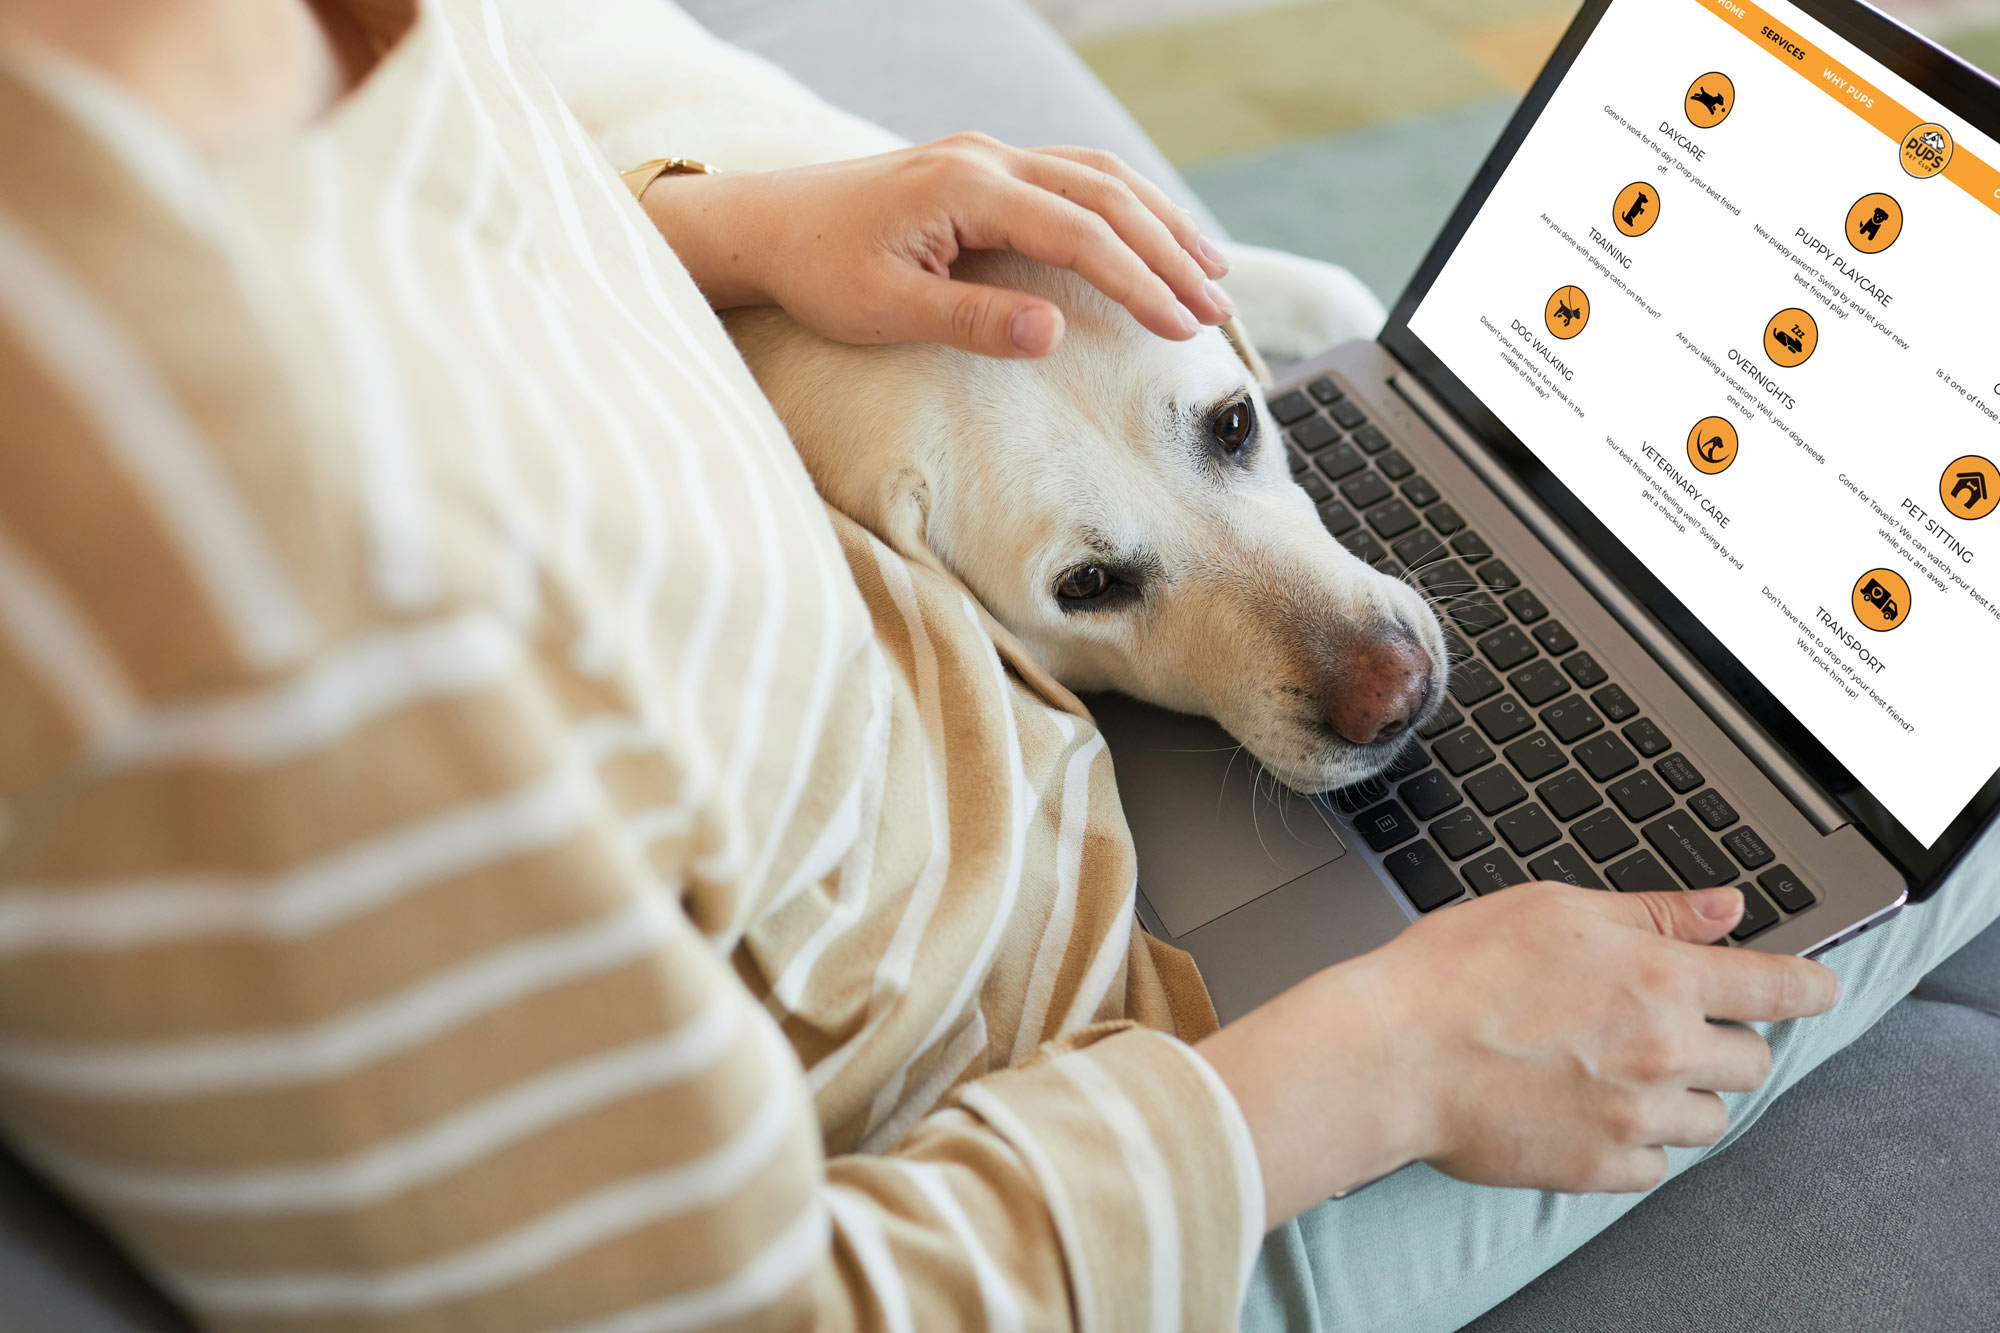 A dog on a woman's lap next to a laptop displaying a website home page design.